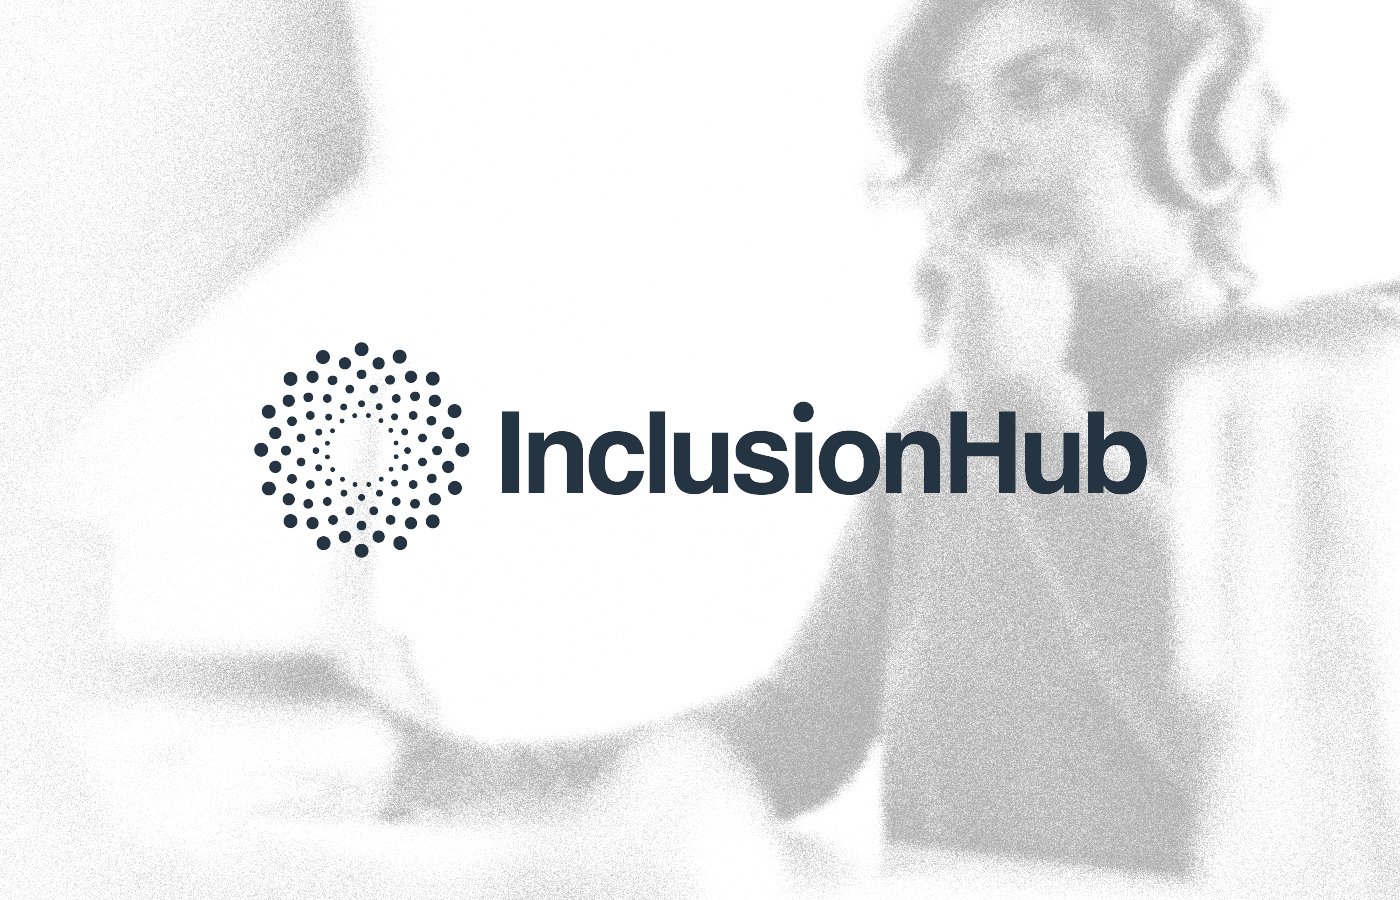 InclusionHub Logo on Grainy background of woman using computer